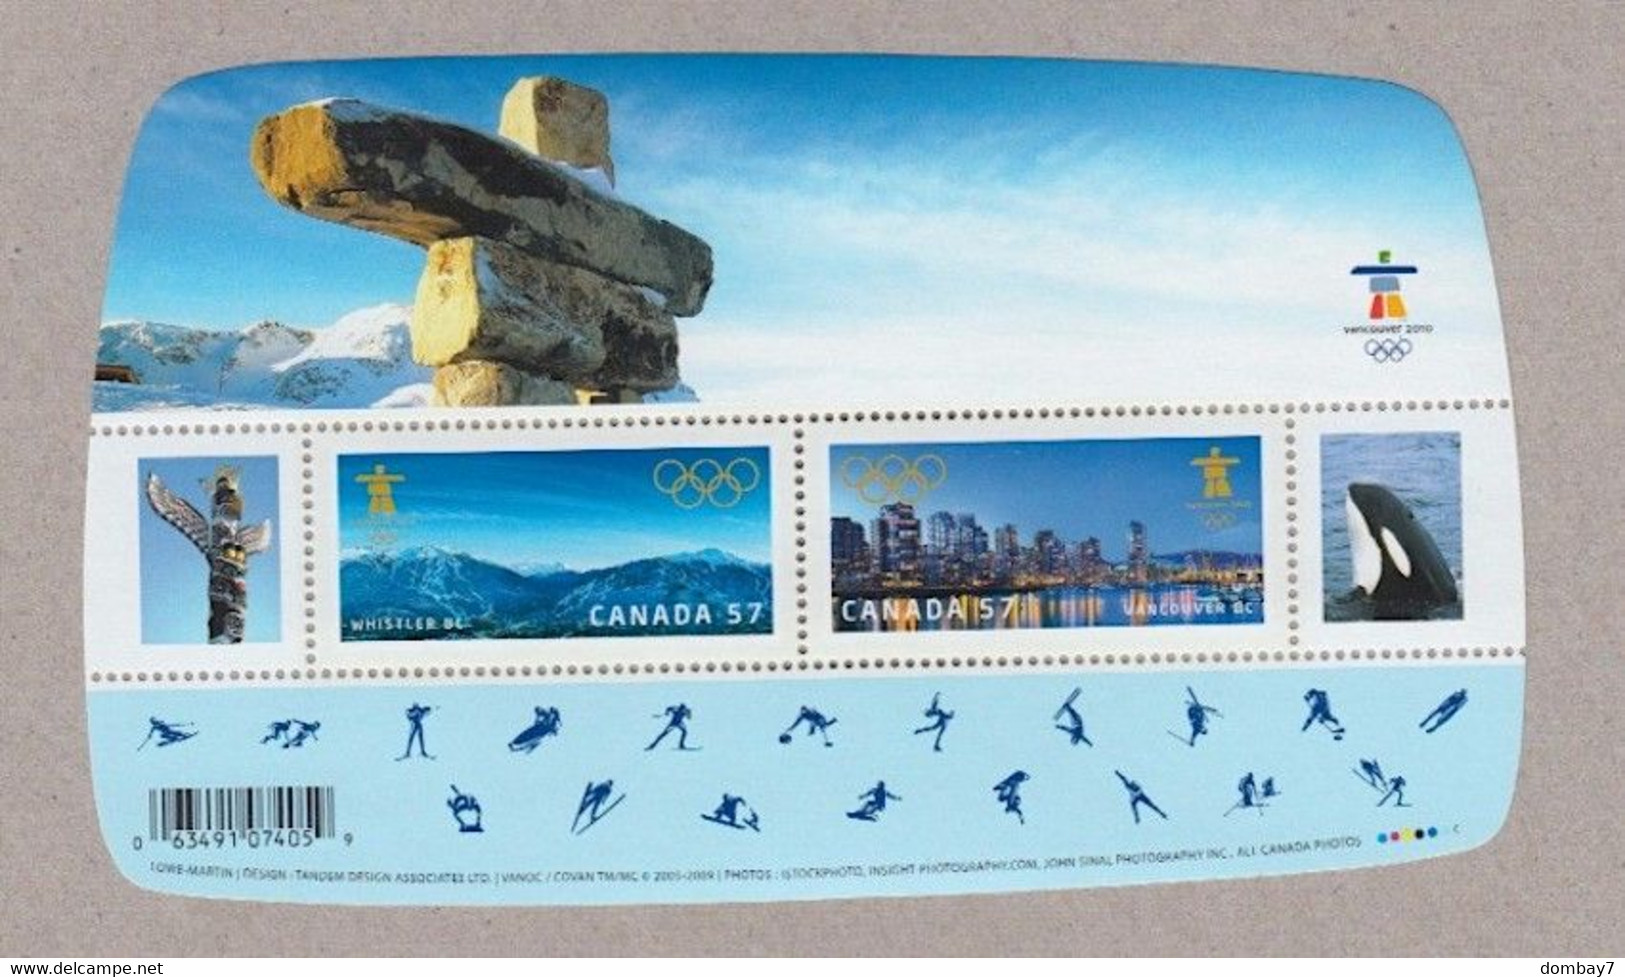 Qt. 2010 VANCOUVER WINTER OLYMPIC GAMES = INUKSHUK, EVENT SITES - Souvenir Sheet Of 2 Stamps = Canada 2010 Sc# 2366 - Hiver 2010: Vancouver